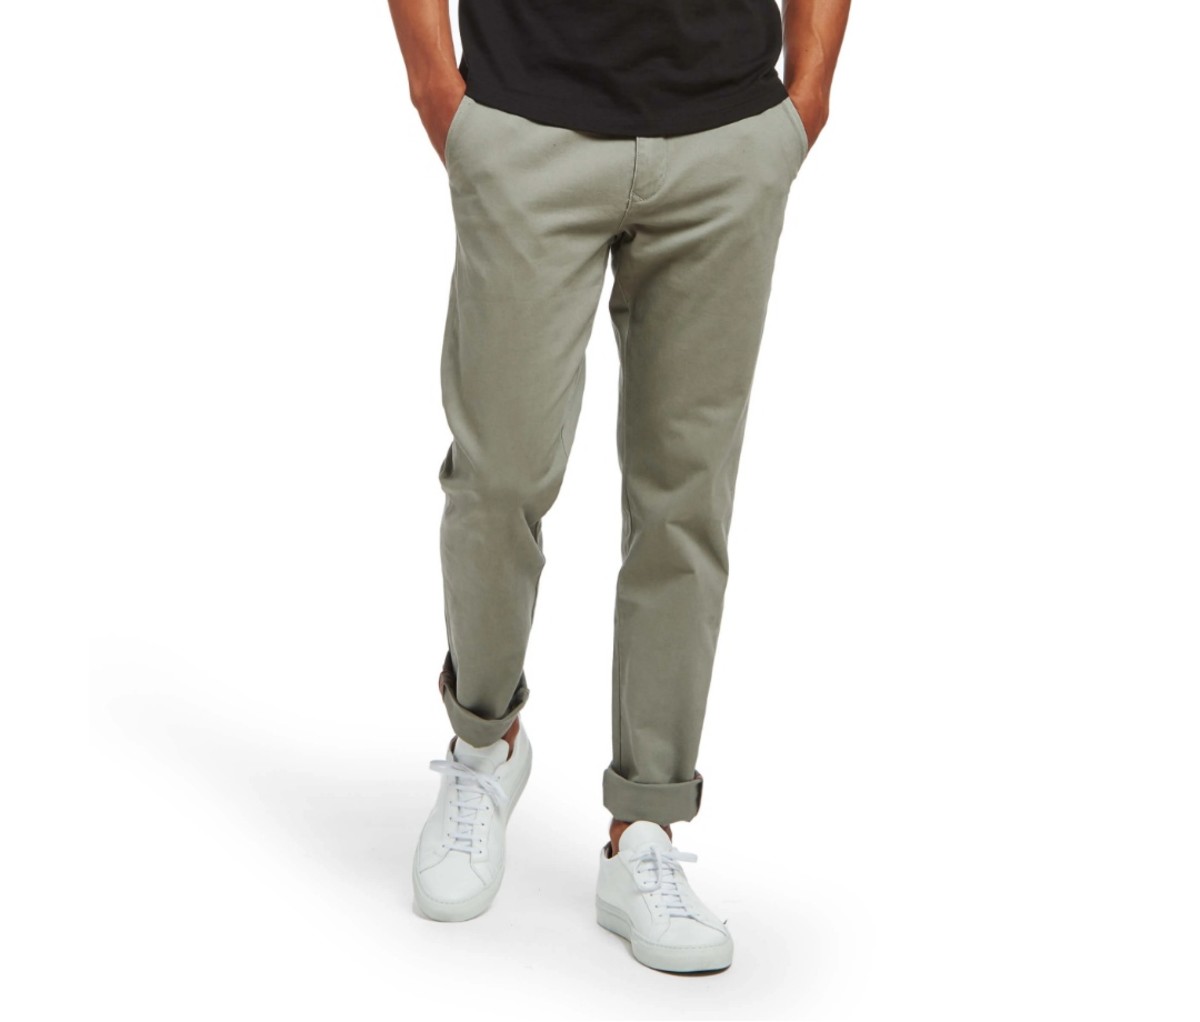 Discover more than 87 high quality khaki pants - in.eteachers